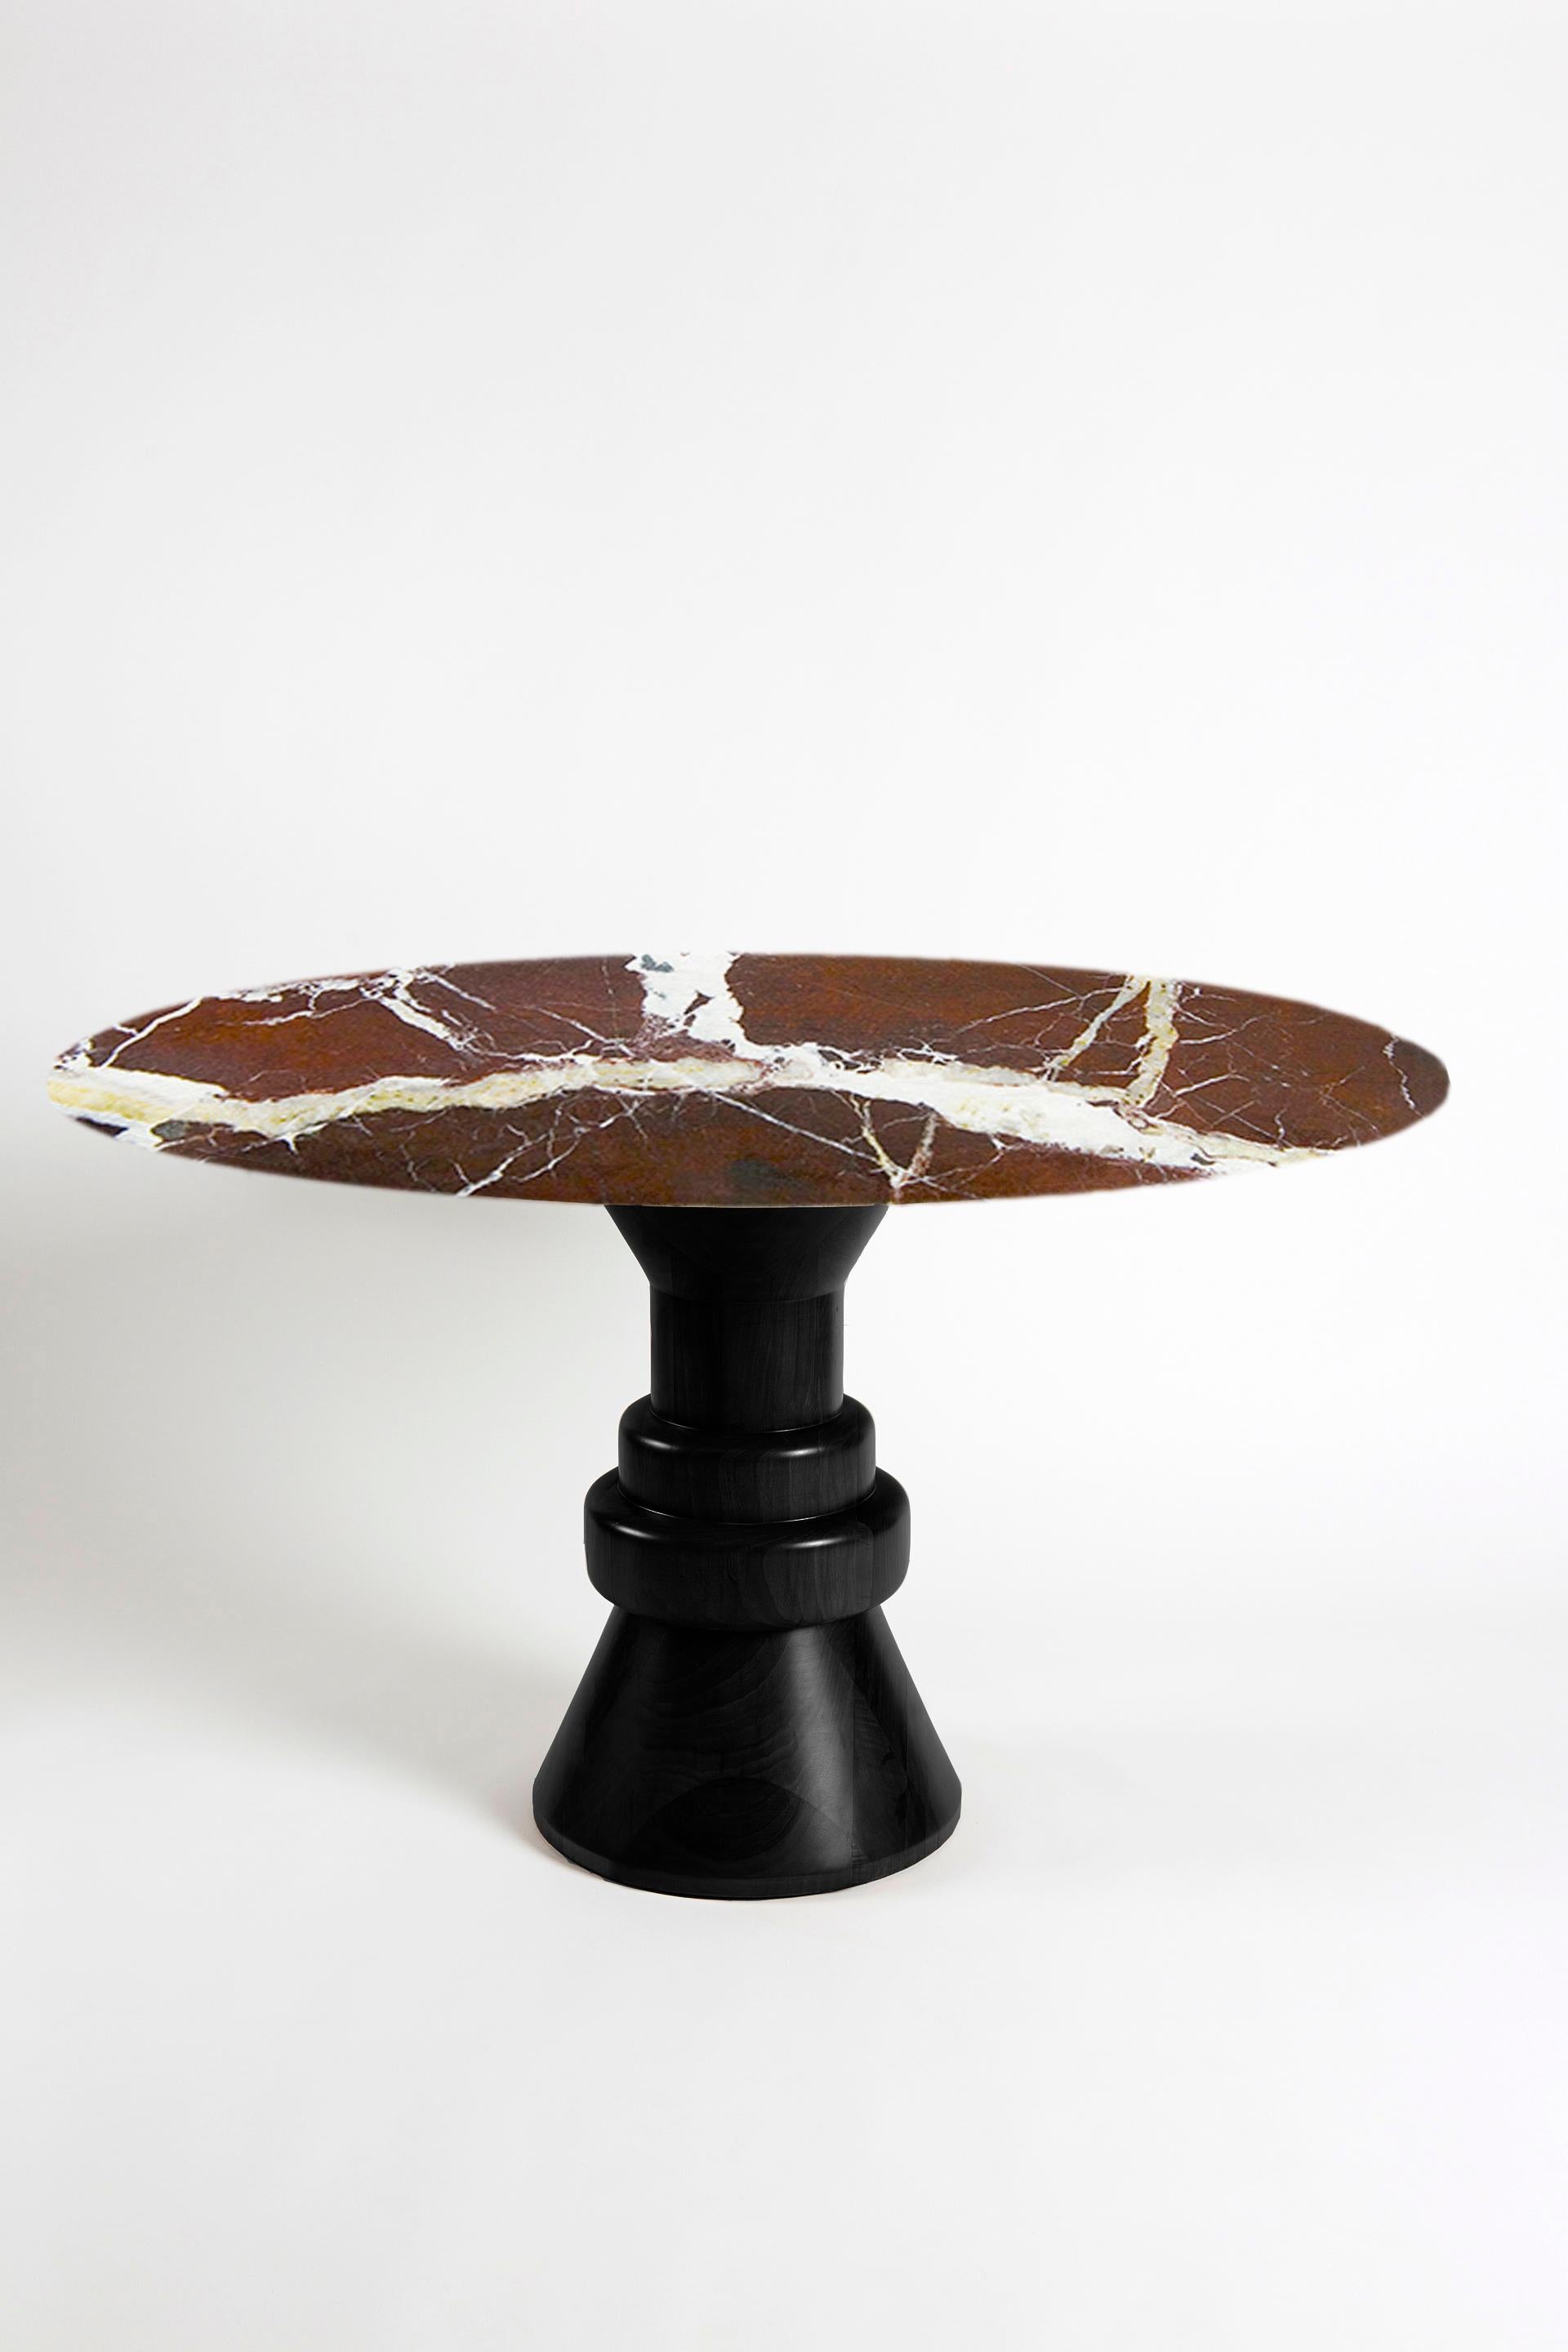 21st Century Gray Marble Round Dining Table with Sculptural Black Wooden Base For Sale 4